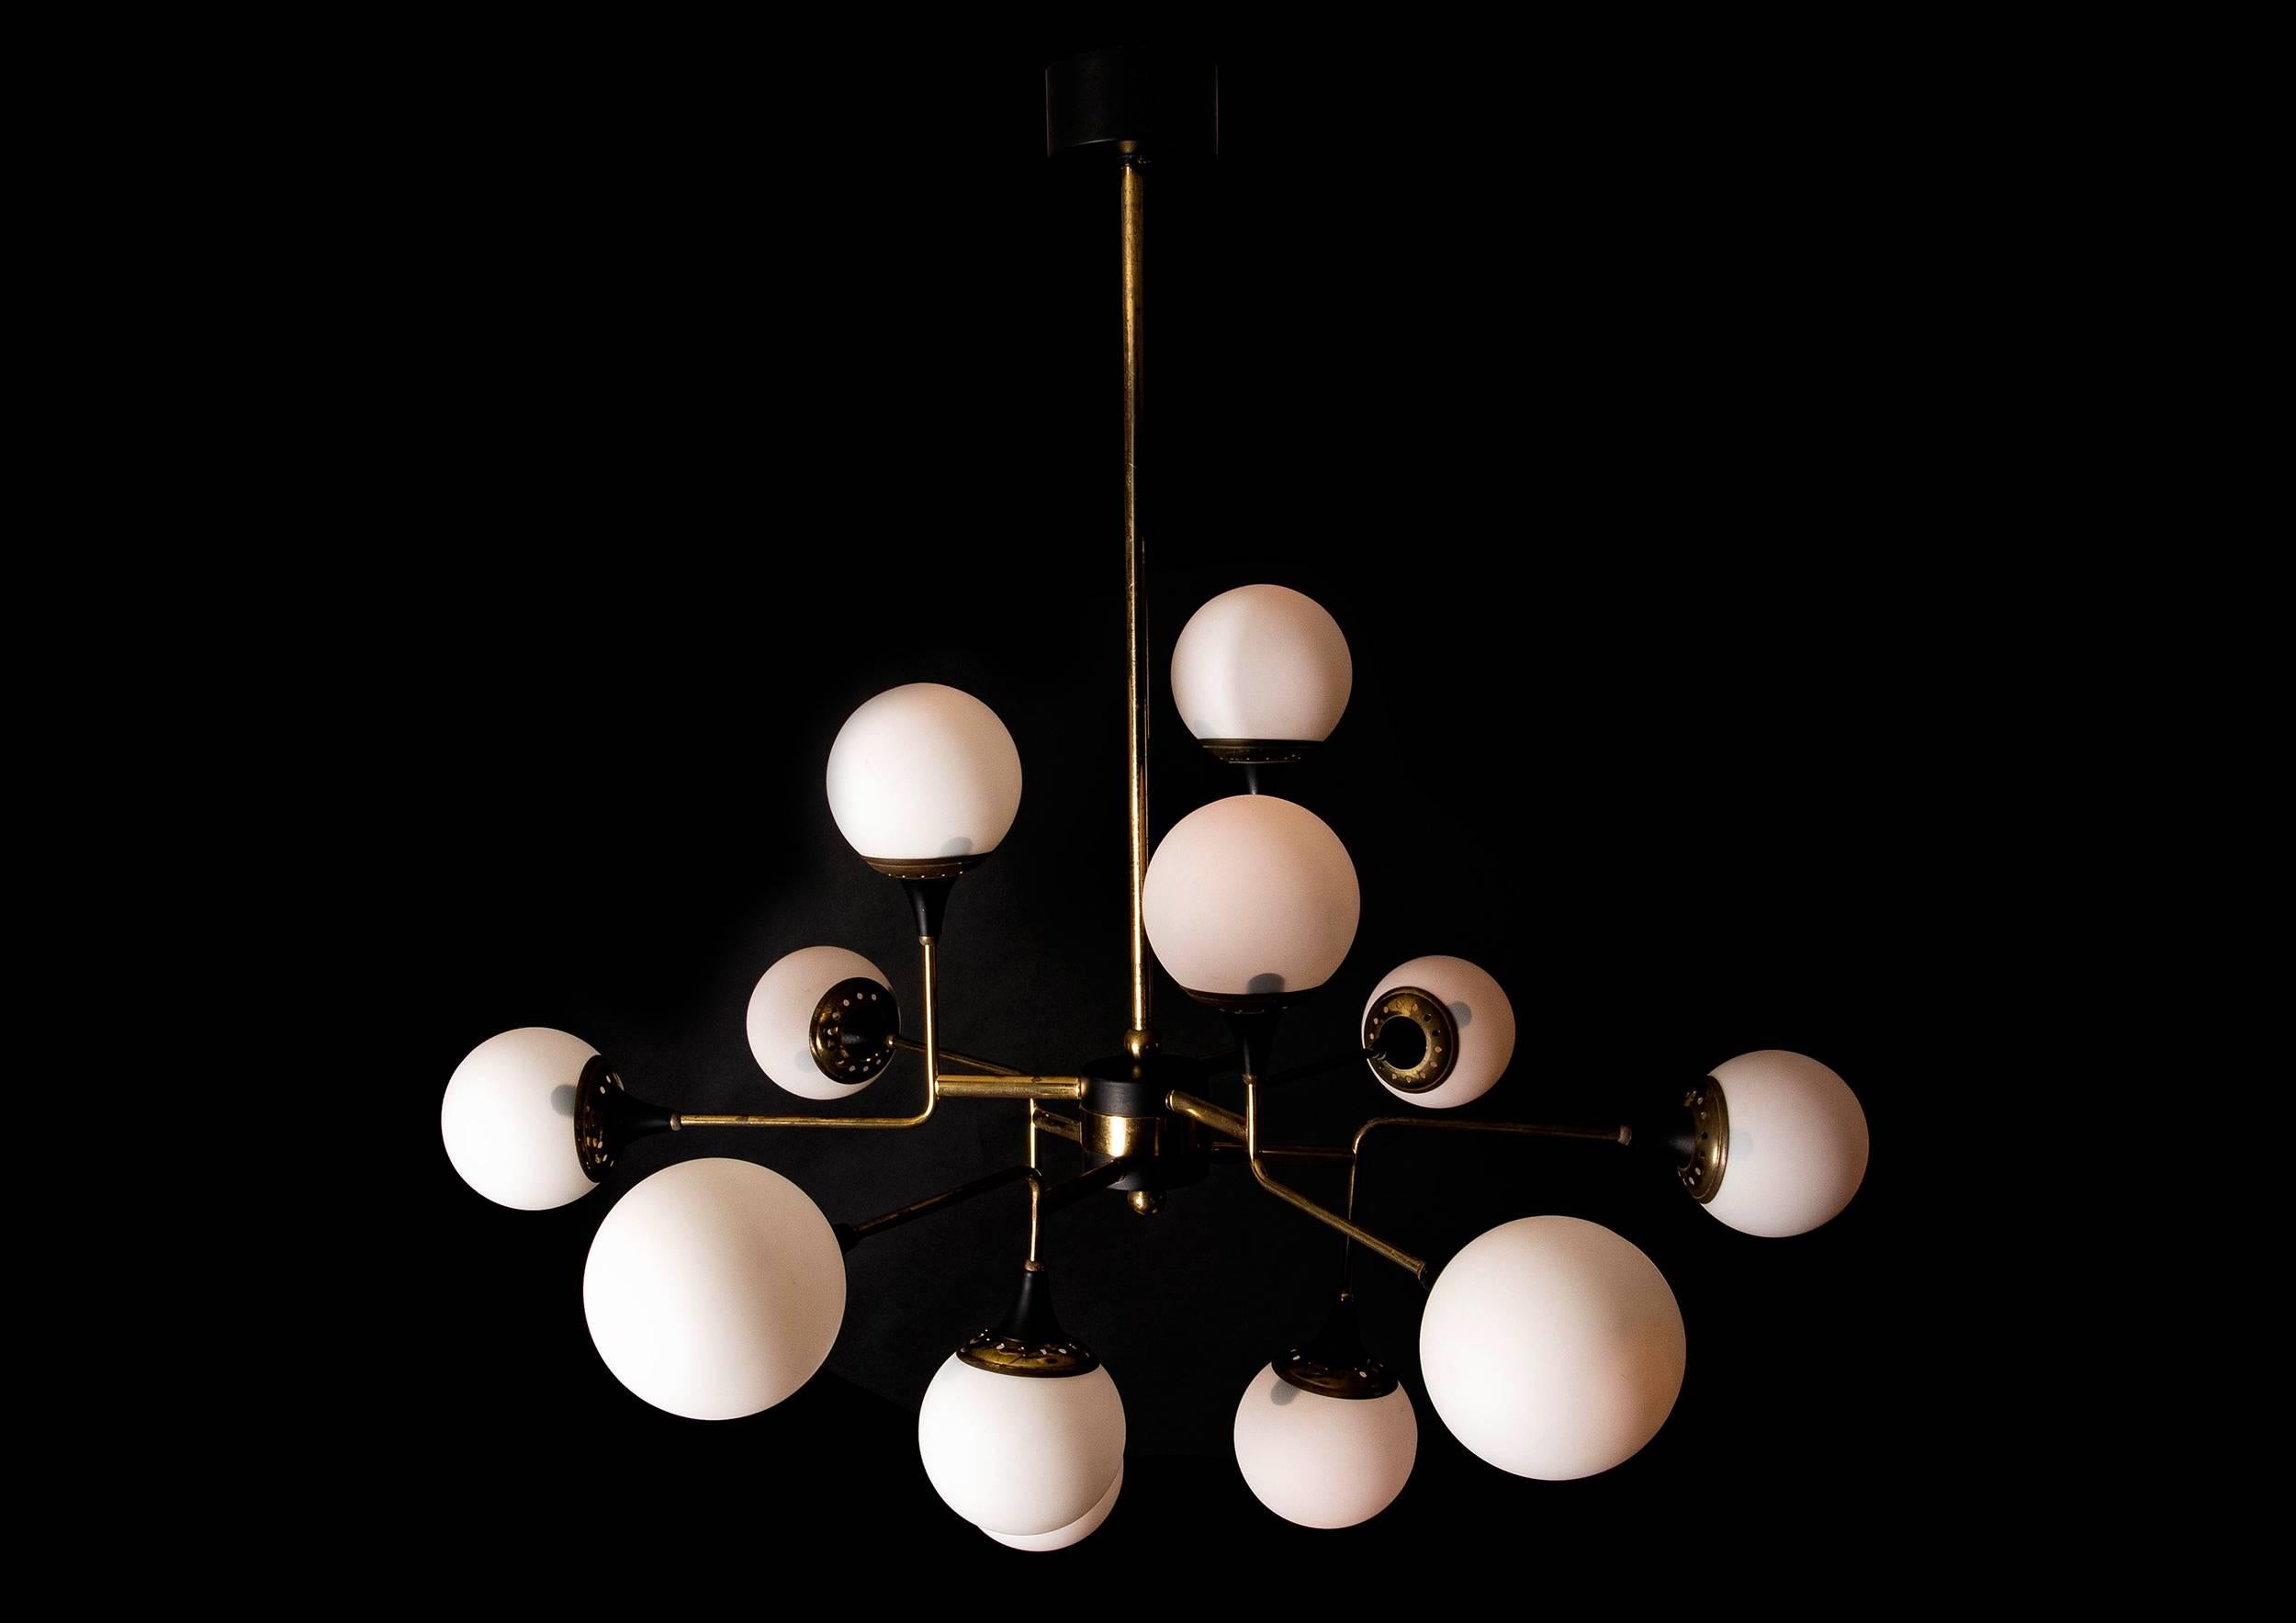 A timeless geometric design, iconic of the period and never bettered. Rare and original with superlative materials, stunning aged patina with 12 beautiful opaline satin glass balls (glass of this period has a quality all of it's own). Conceived and